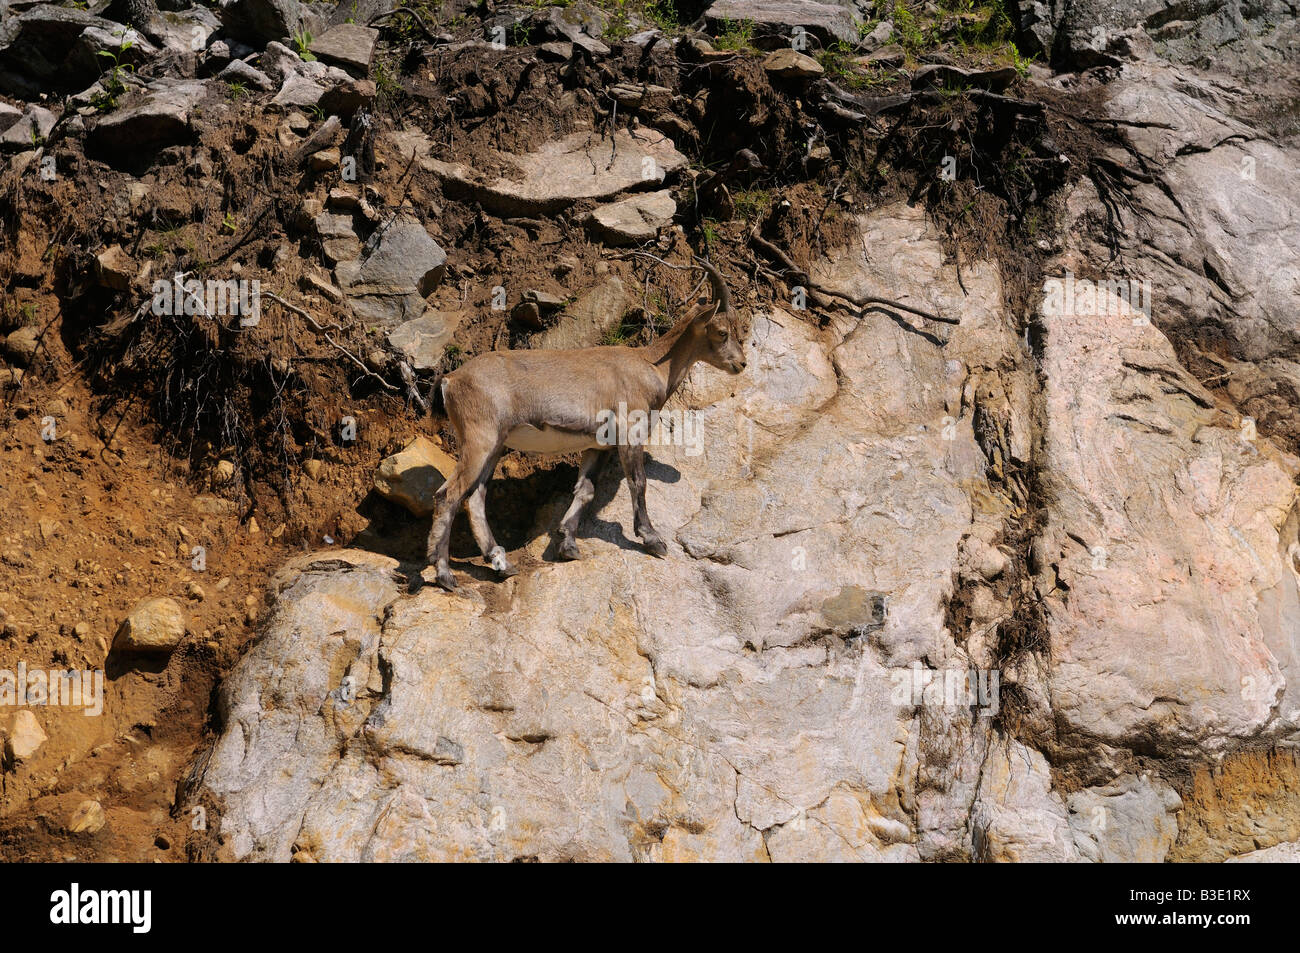 Alpine Ibex mountain goat walking on a steep rock cliff in Omega Park Quebec Canada Stock Photo